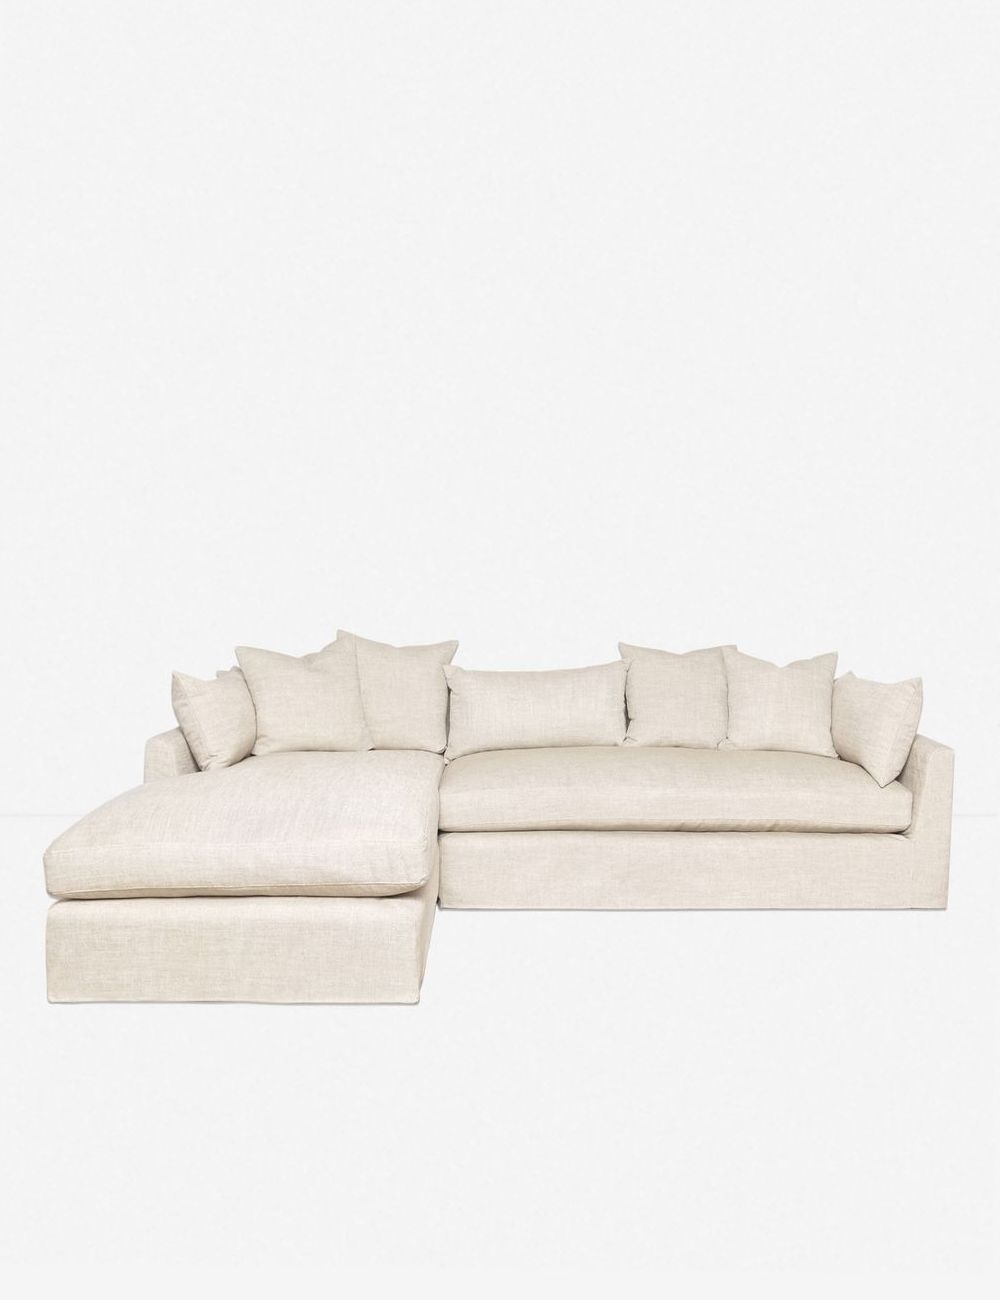 PARQUE LEFT-FACING SLIPCOVER SECTIONAL SOFA - Image 0